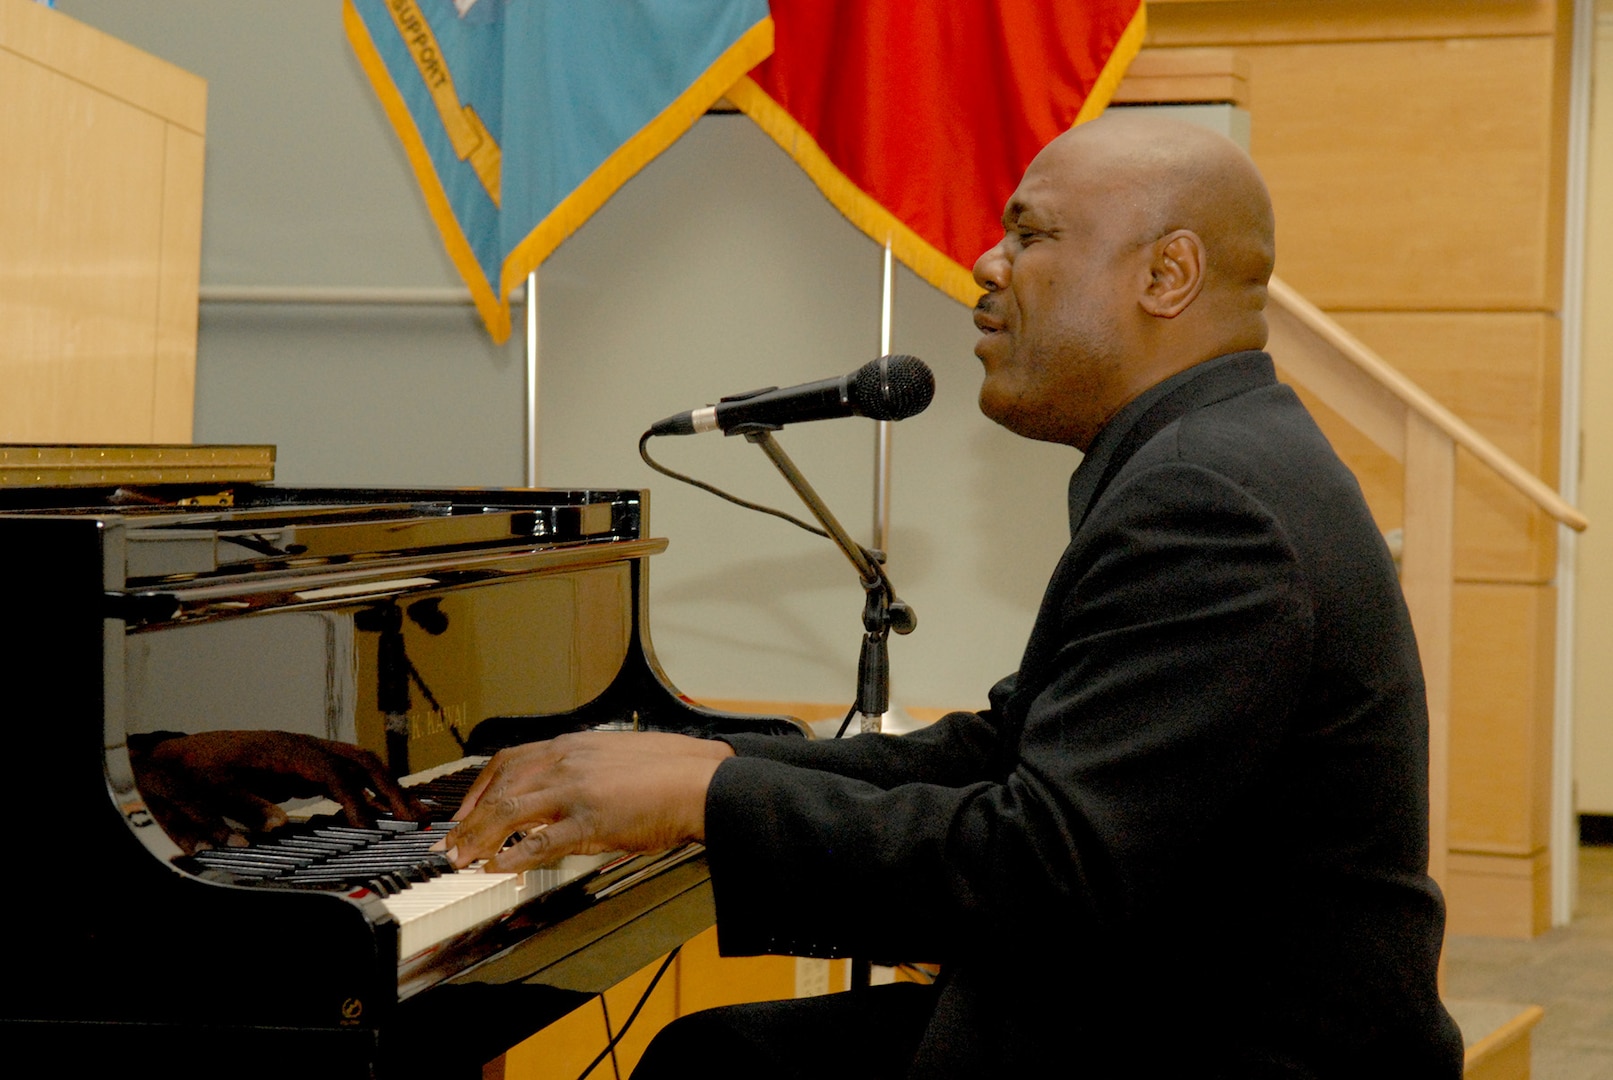 Joe Patterson, producer and president of Key Arts Productions, plays the piano as part of a performance by The Three Soulful Tenors during an African-American History Month observance Feb. 14 at NSA Philadelphia.